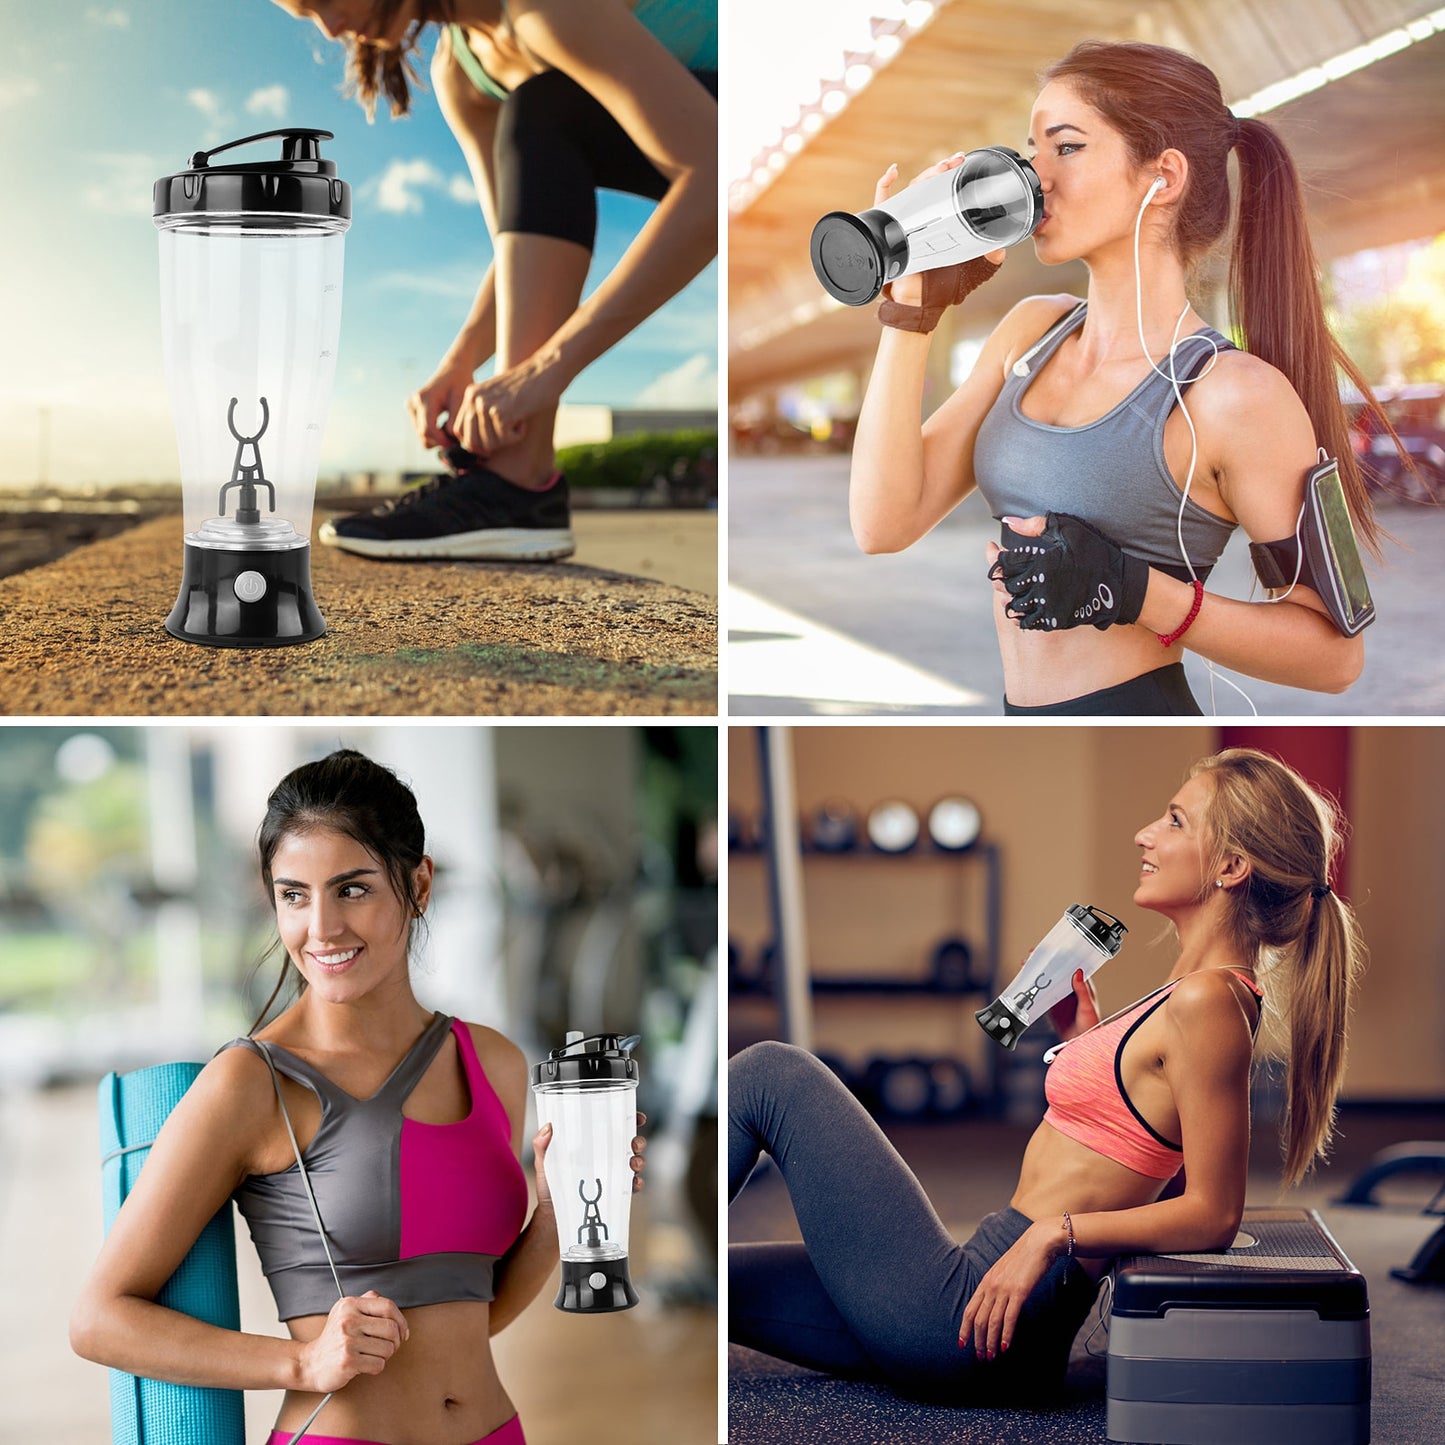 350ML Electric Protein Powder Mixing Cup Automatic Shaker Bottle